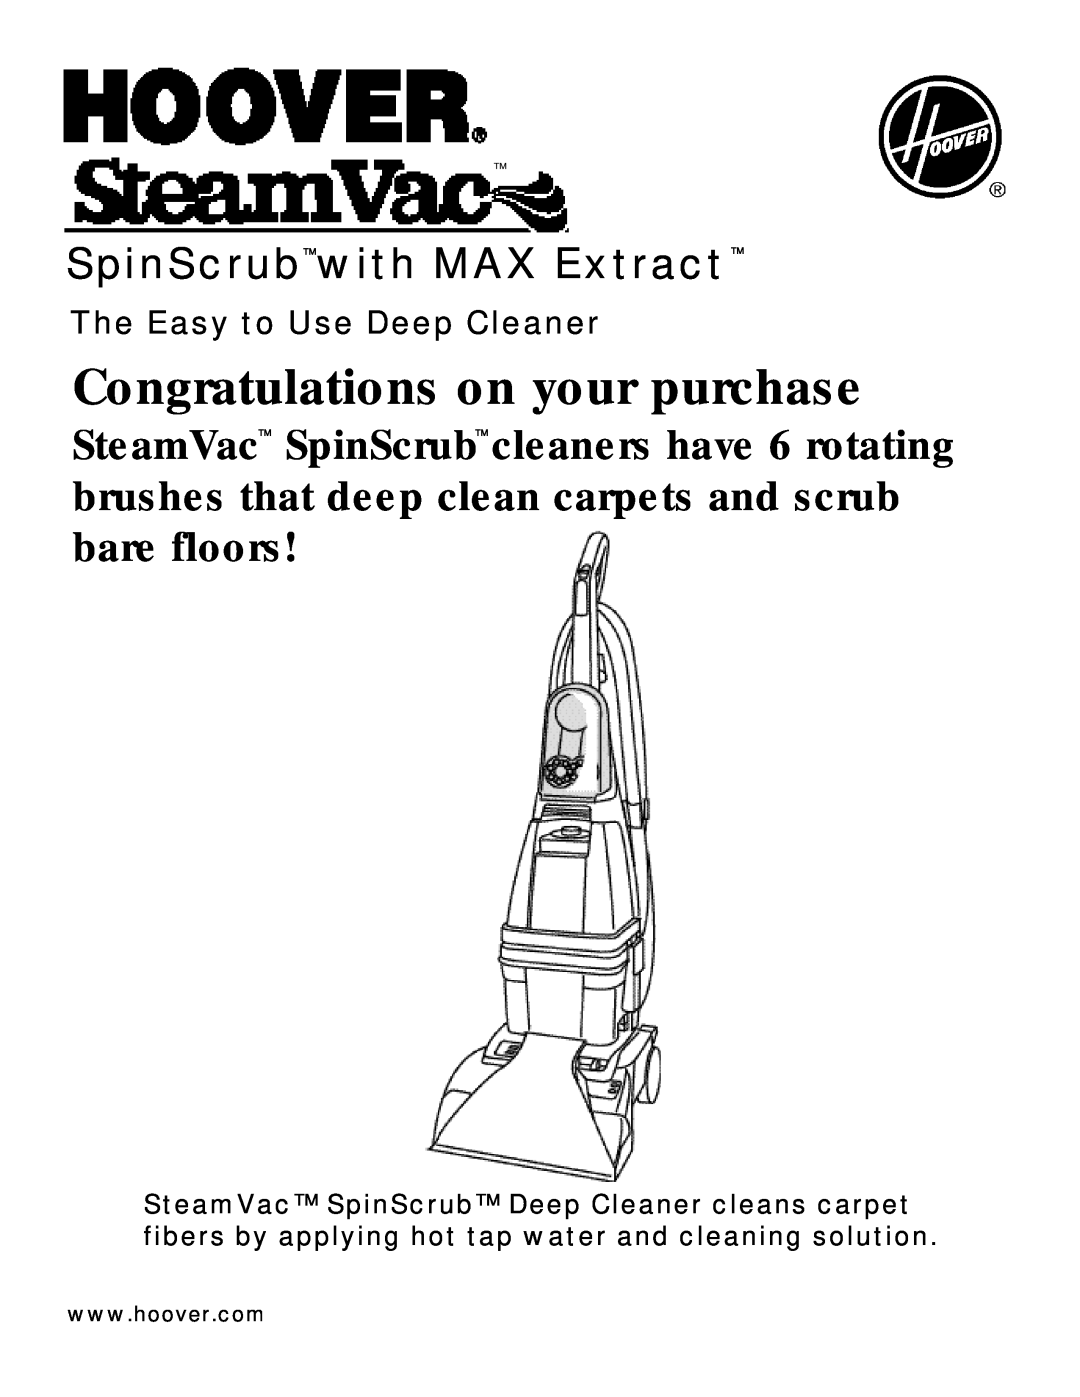 Hoover manual SpinScrubwith MAX Extract, The Easy to Use Deep Cleaner, Congratulations on your purchase, SteamVac 